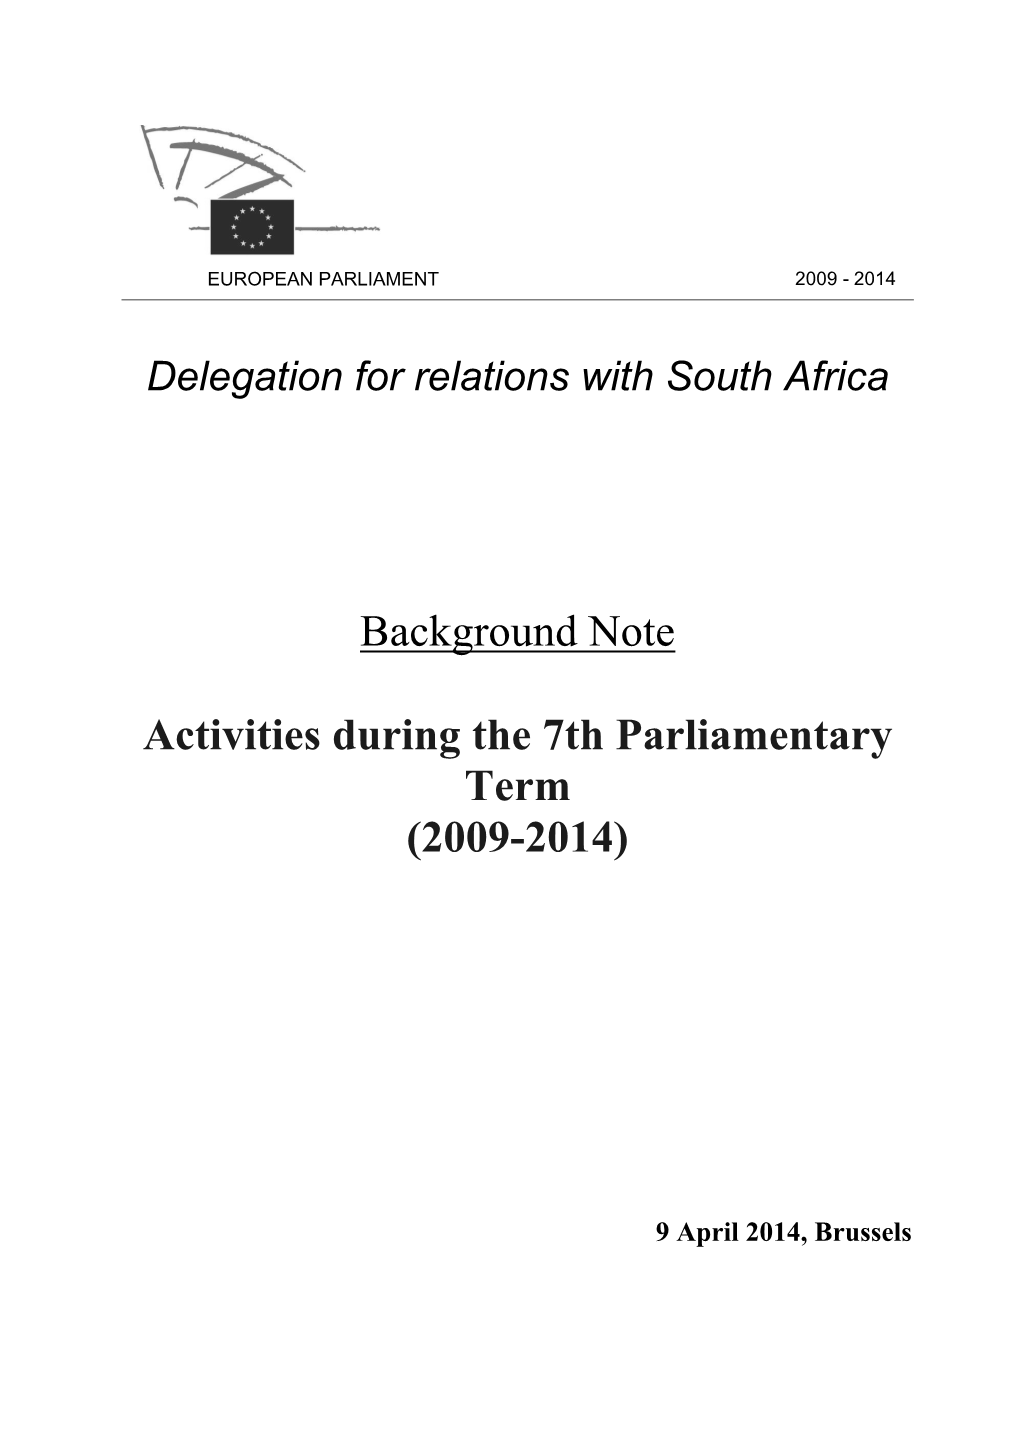 Background Note Activities During the 7Th Parliamentary Term (2009-2014)